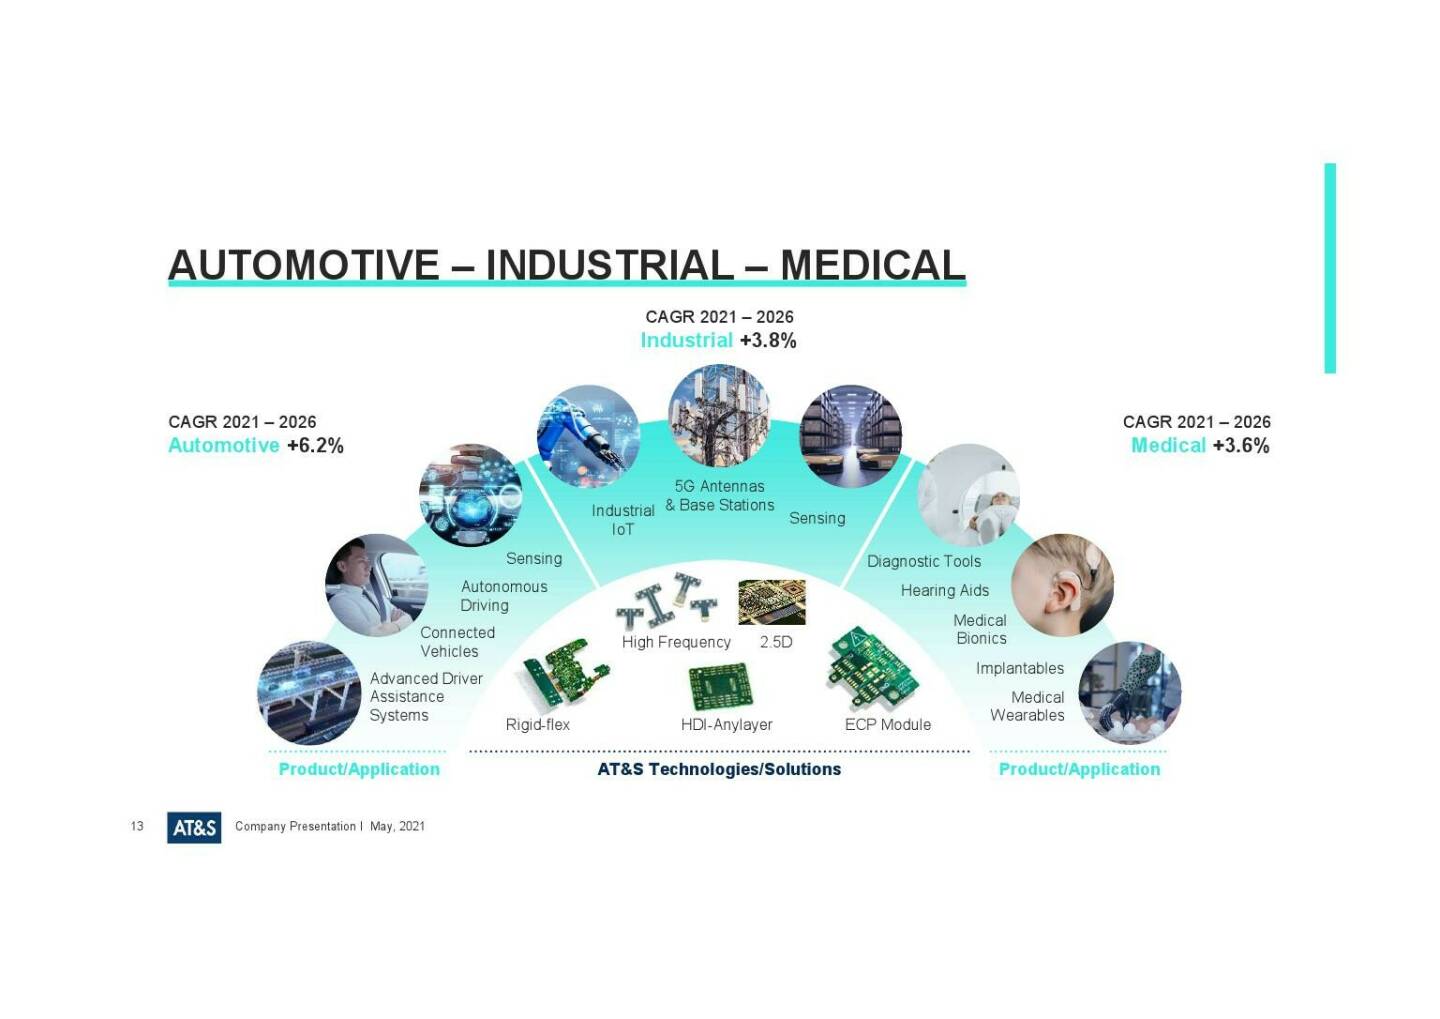 AT&S - Automotive - Industrial - Medical